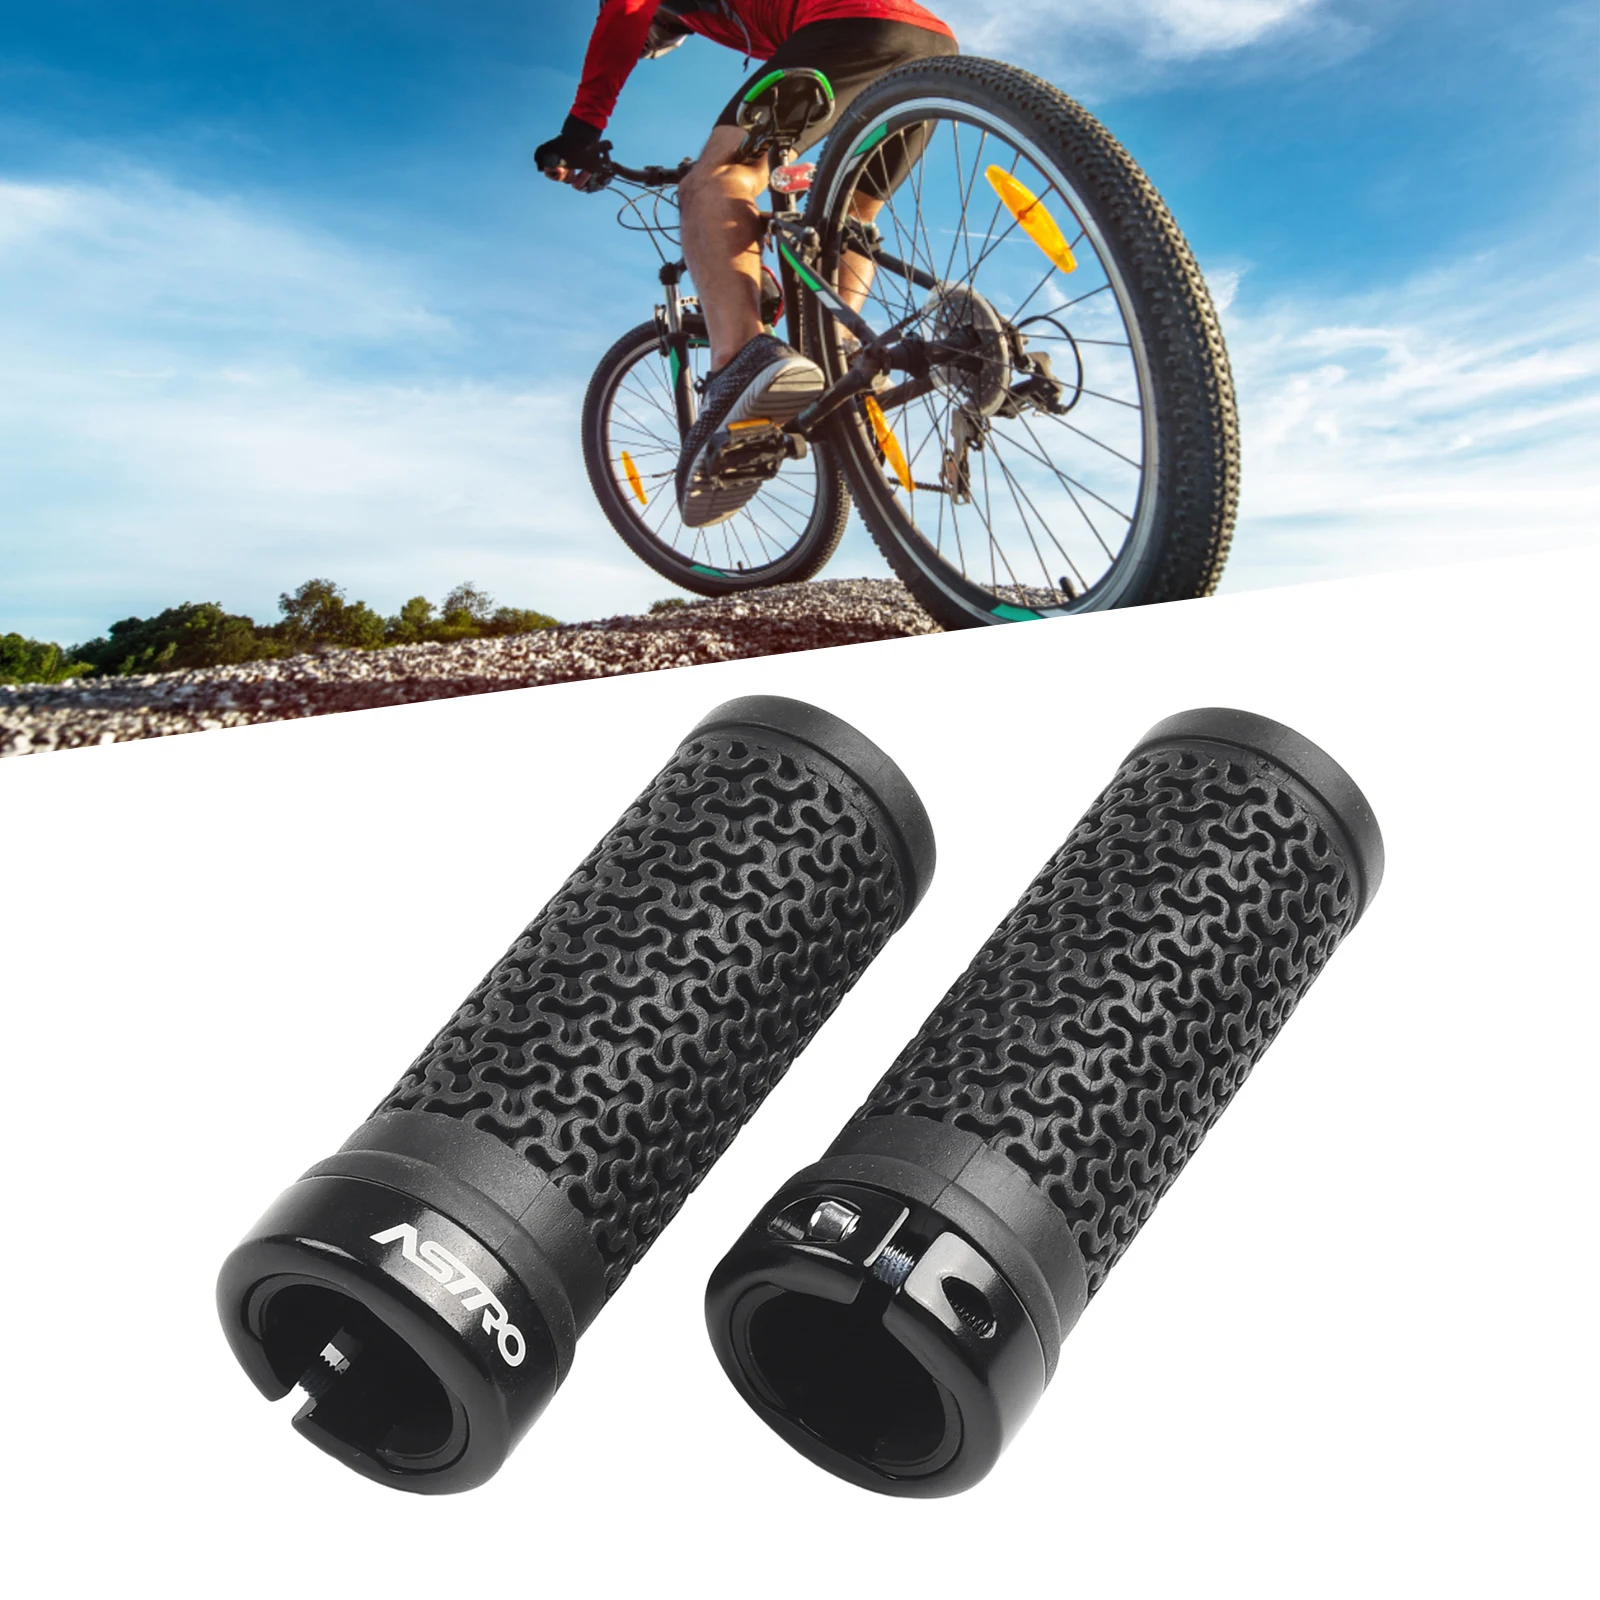 

1x Bicycle Handlebar Grips Wide Palm Rest Mountain Bicycle Folding Handlebar Grip Long/Short Shift Handle Grips 130/90mm Rubber